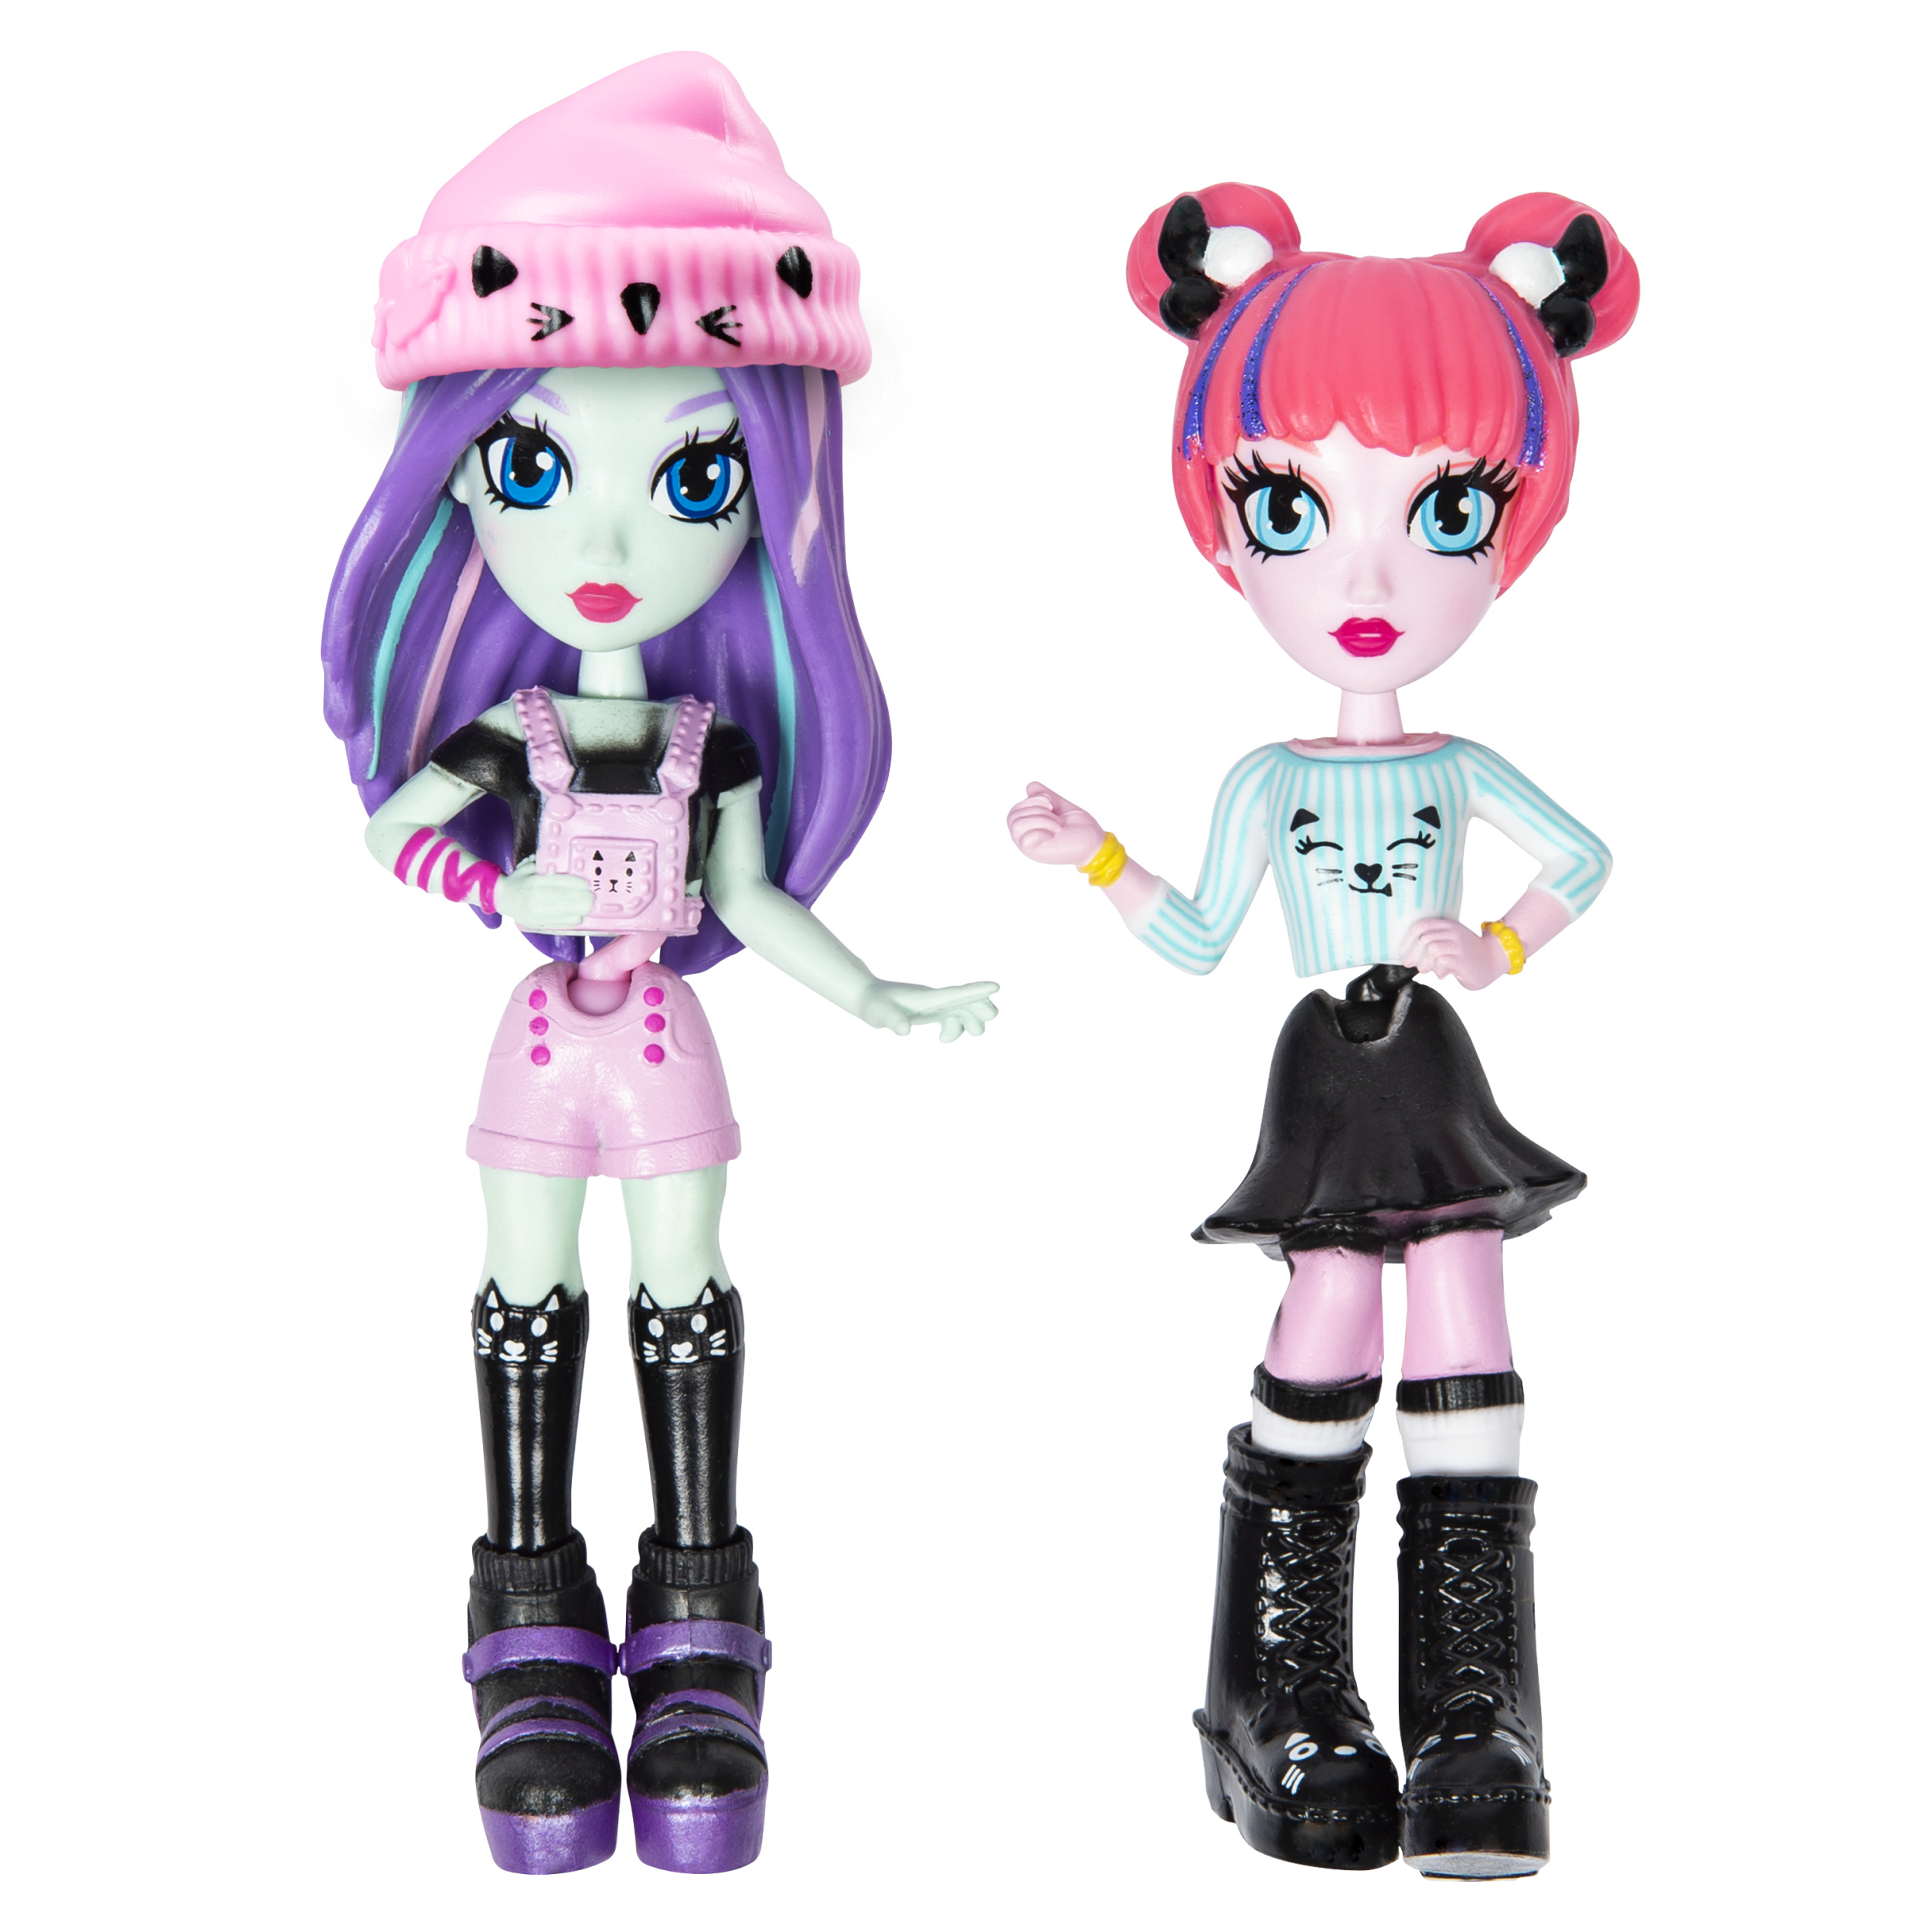 Off The Hook Style BFFs Brooklyn & Alexis Fashion Doll Playset, 6 Pieces Included - image 1 of 8